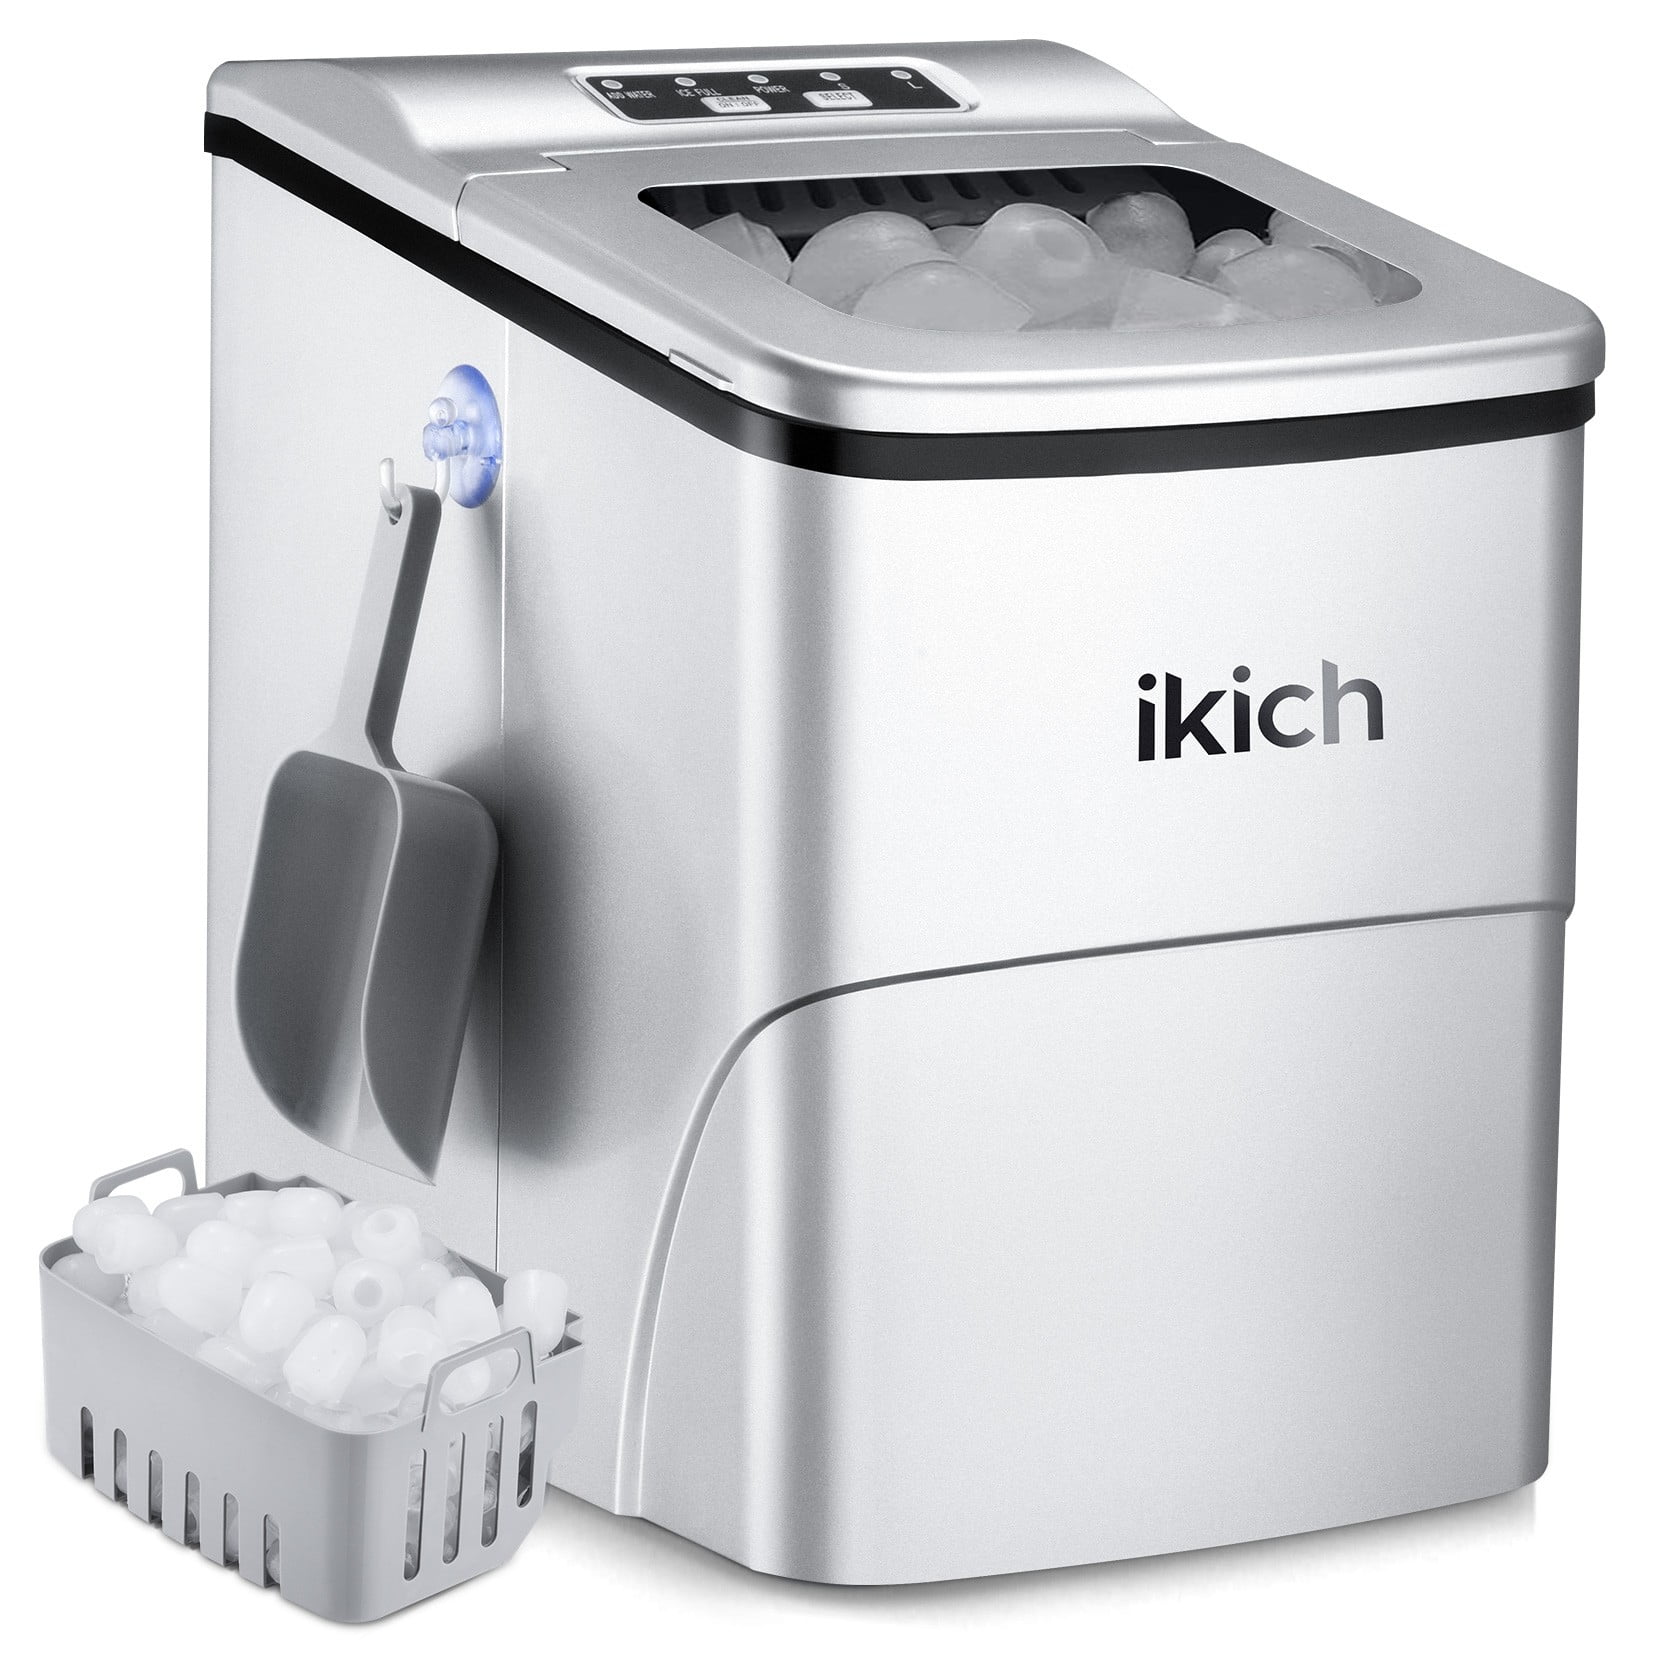 Auertech Ice Maker Countertop Perfect for Kitchen/Office/Bar 9 Cubes Ready in 8 Mins Make 26lbs ice in 24 Hrs Portable and Compact Ice Maker Machine With Ice Scoop and Basket 